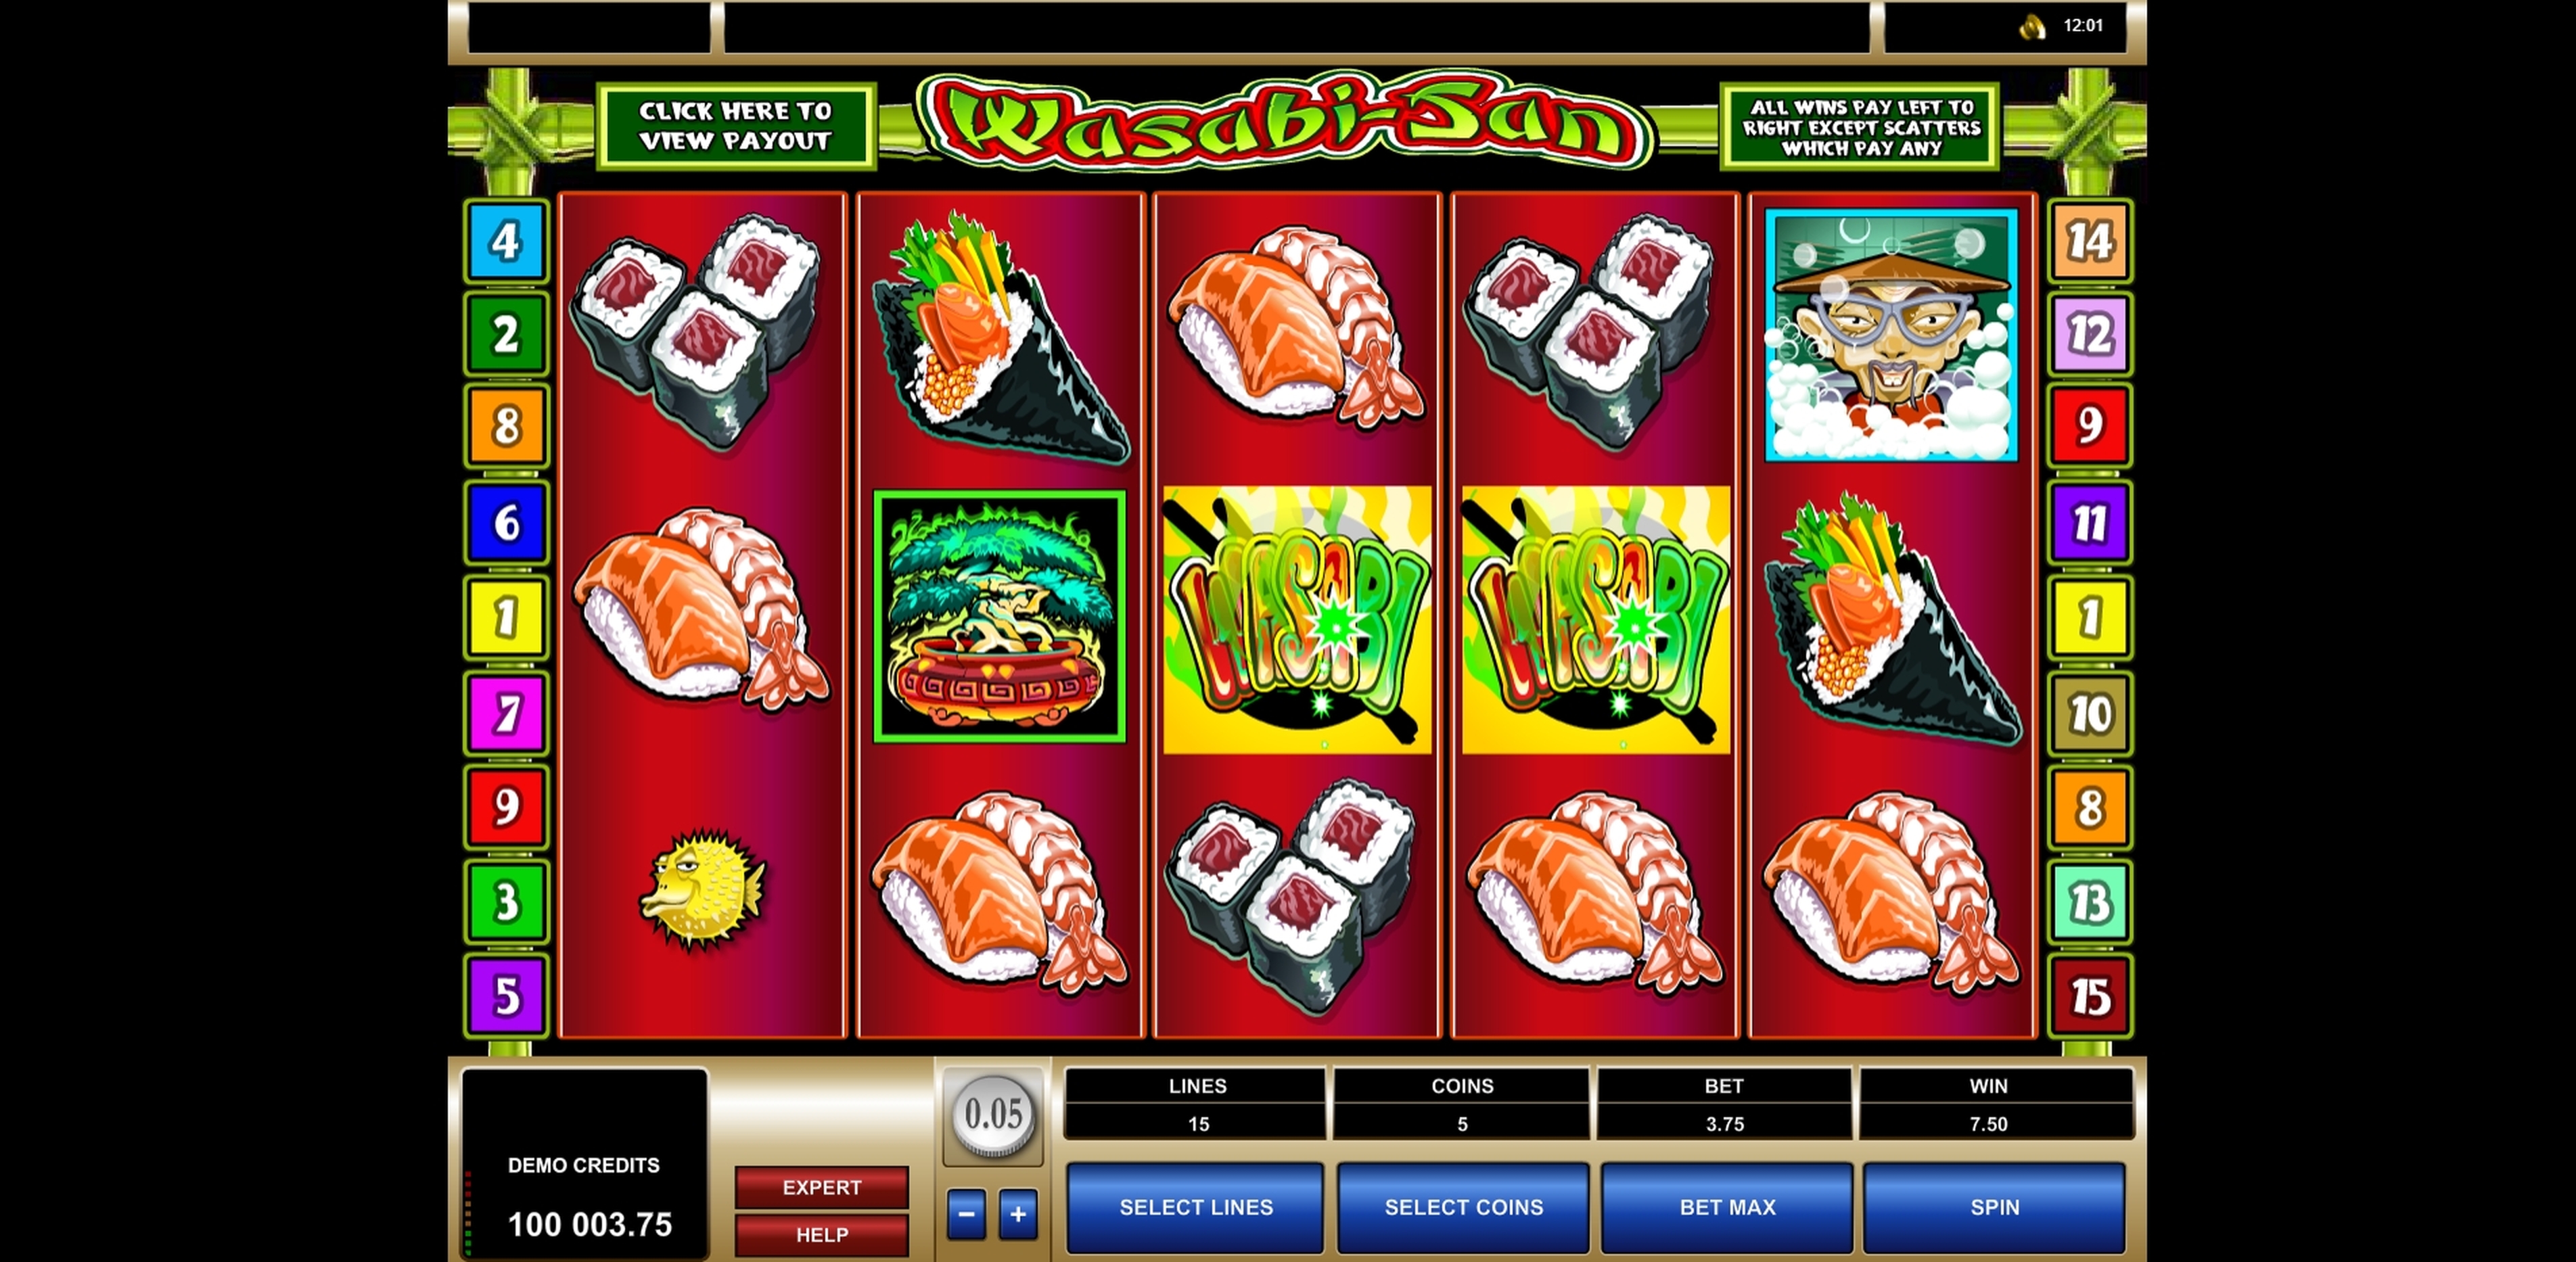 Win Money in Wasabi San Free Slot Game by Microgaming